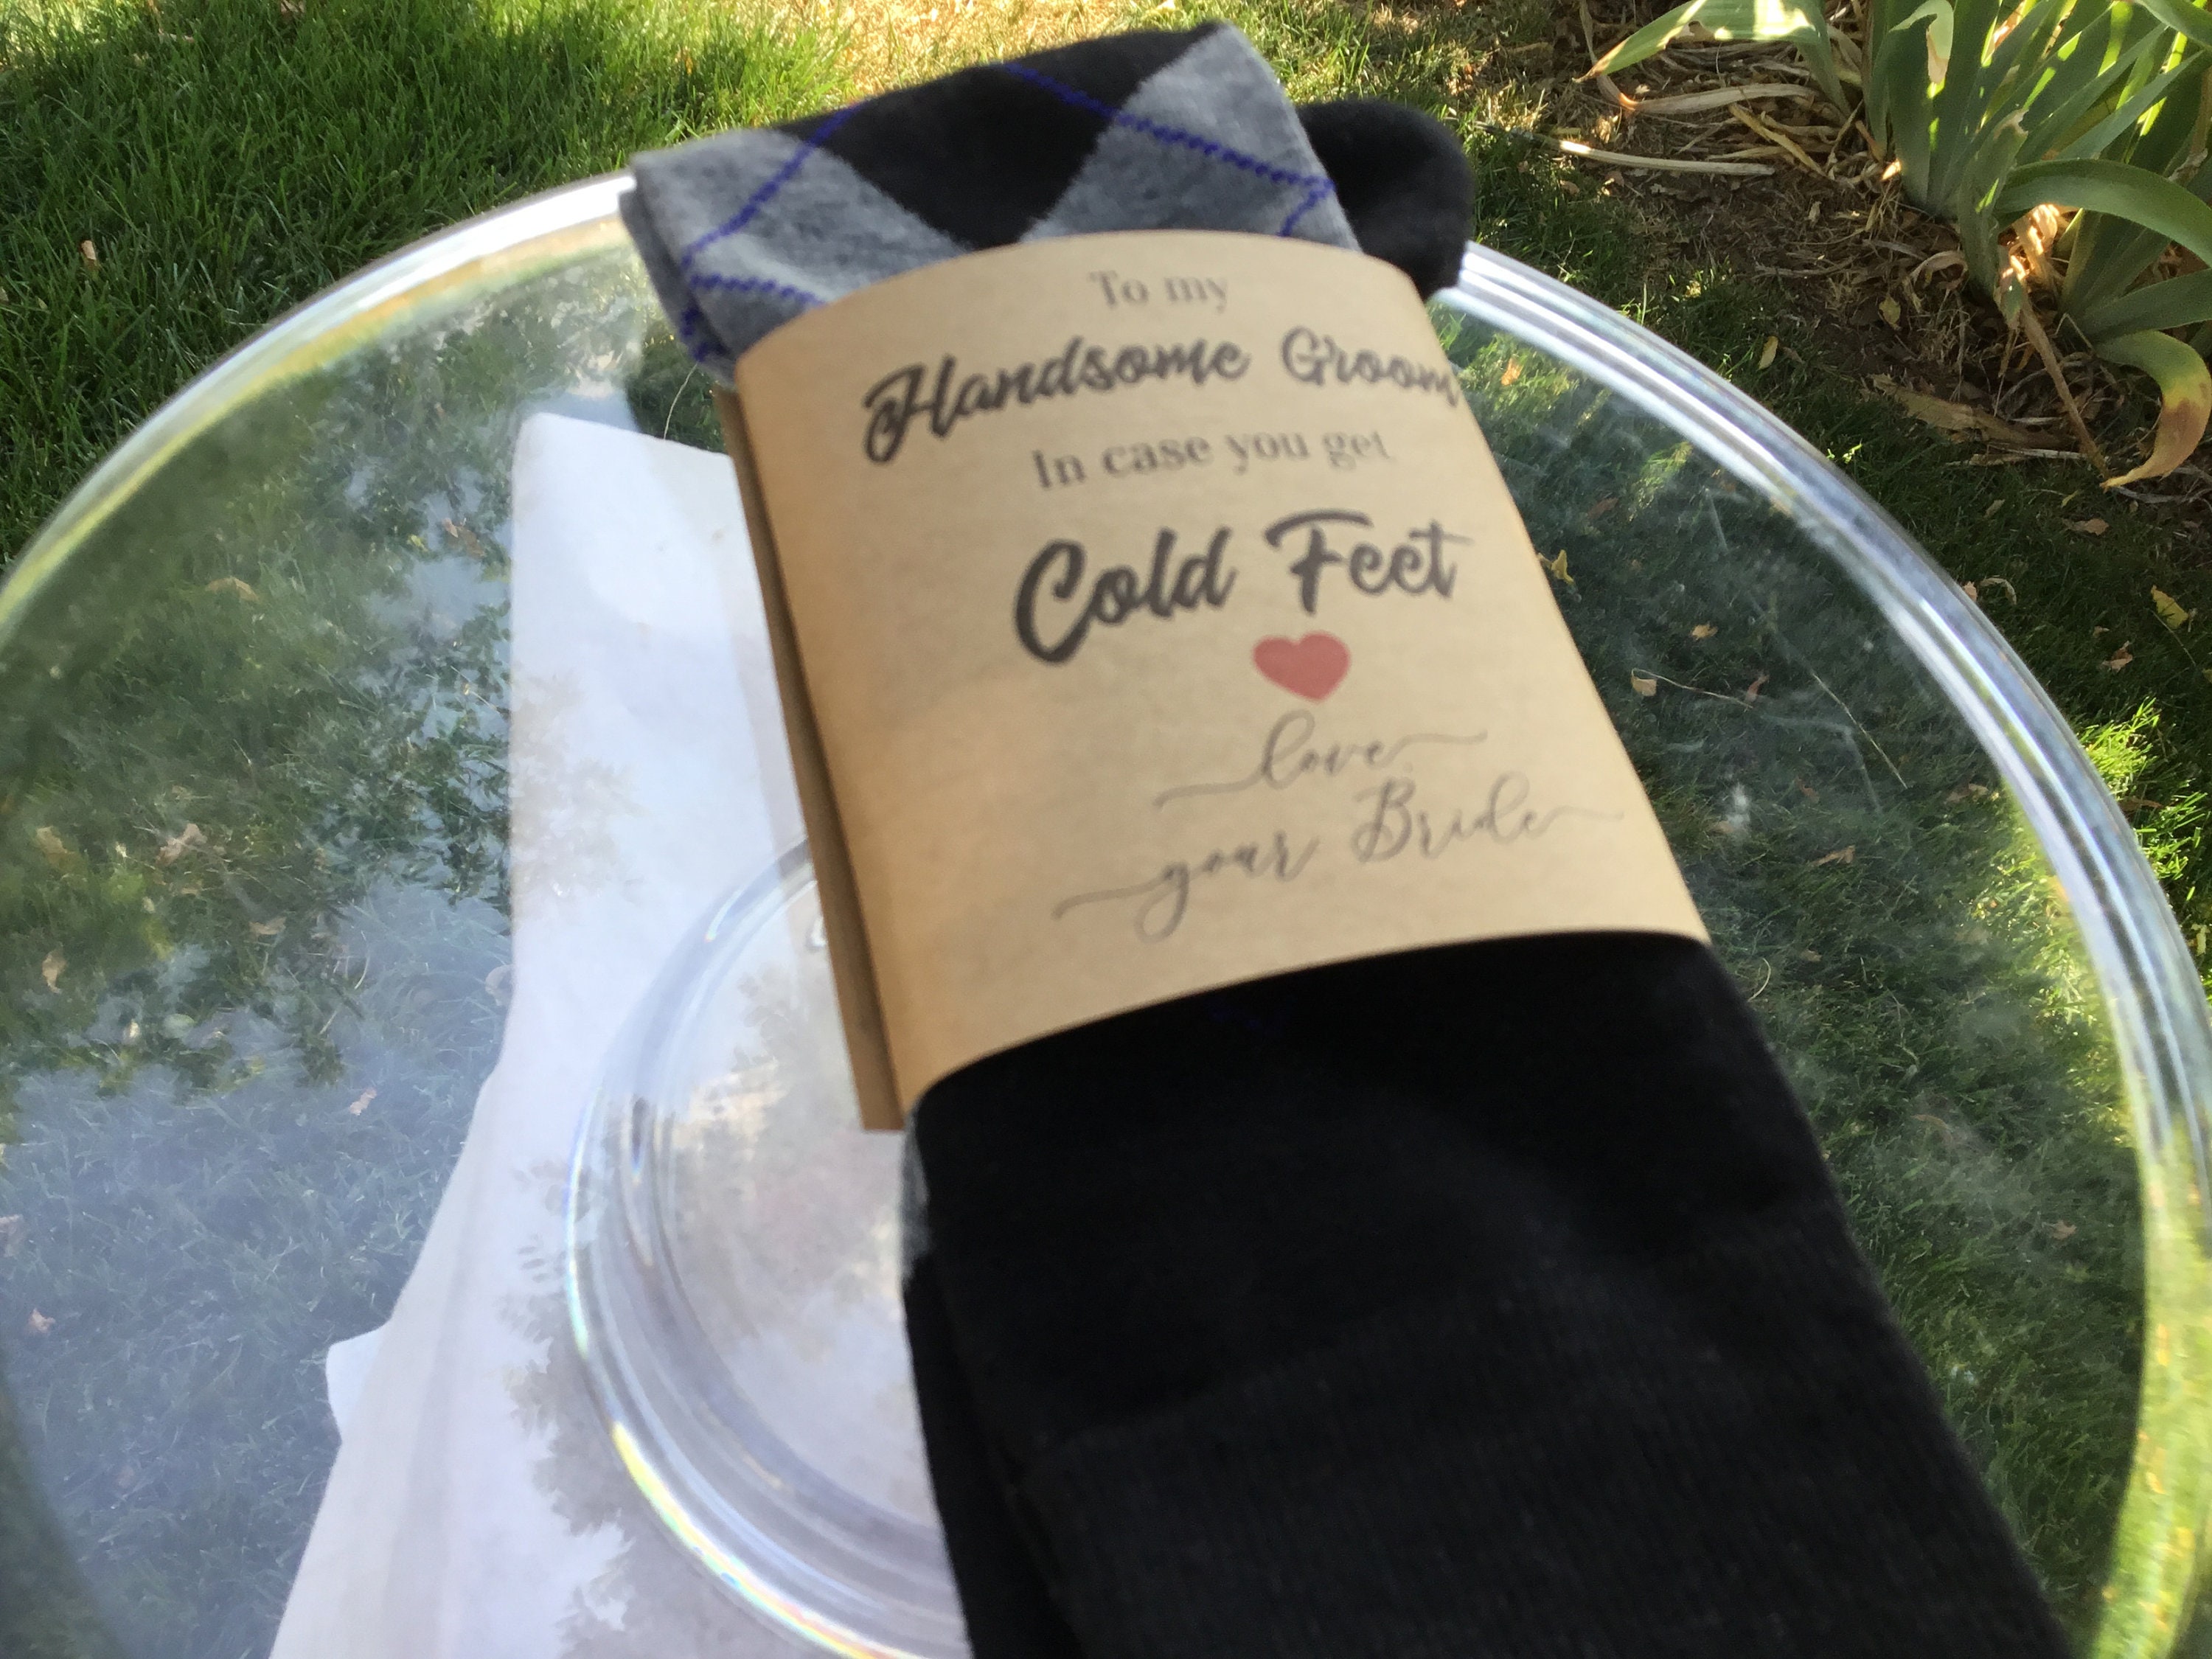 Cold Feet Wedding Groom Socks in Case You Get Cold Feet - Etsy